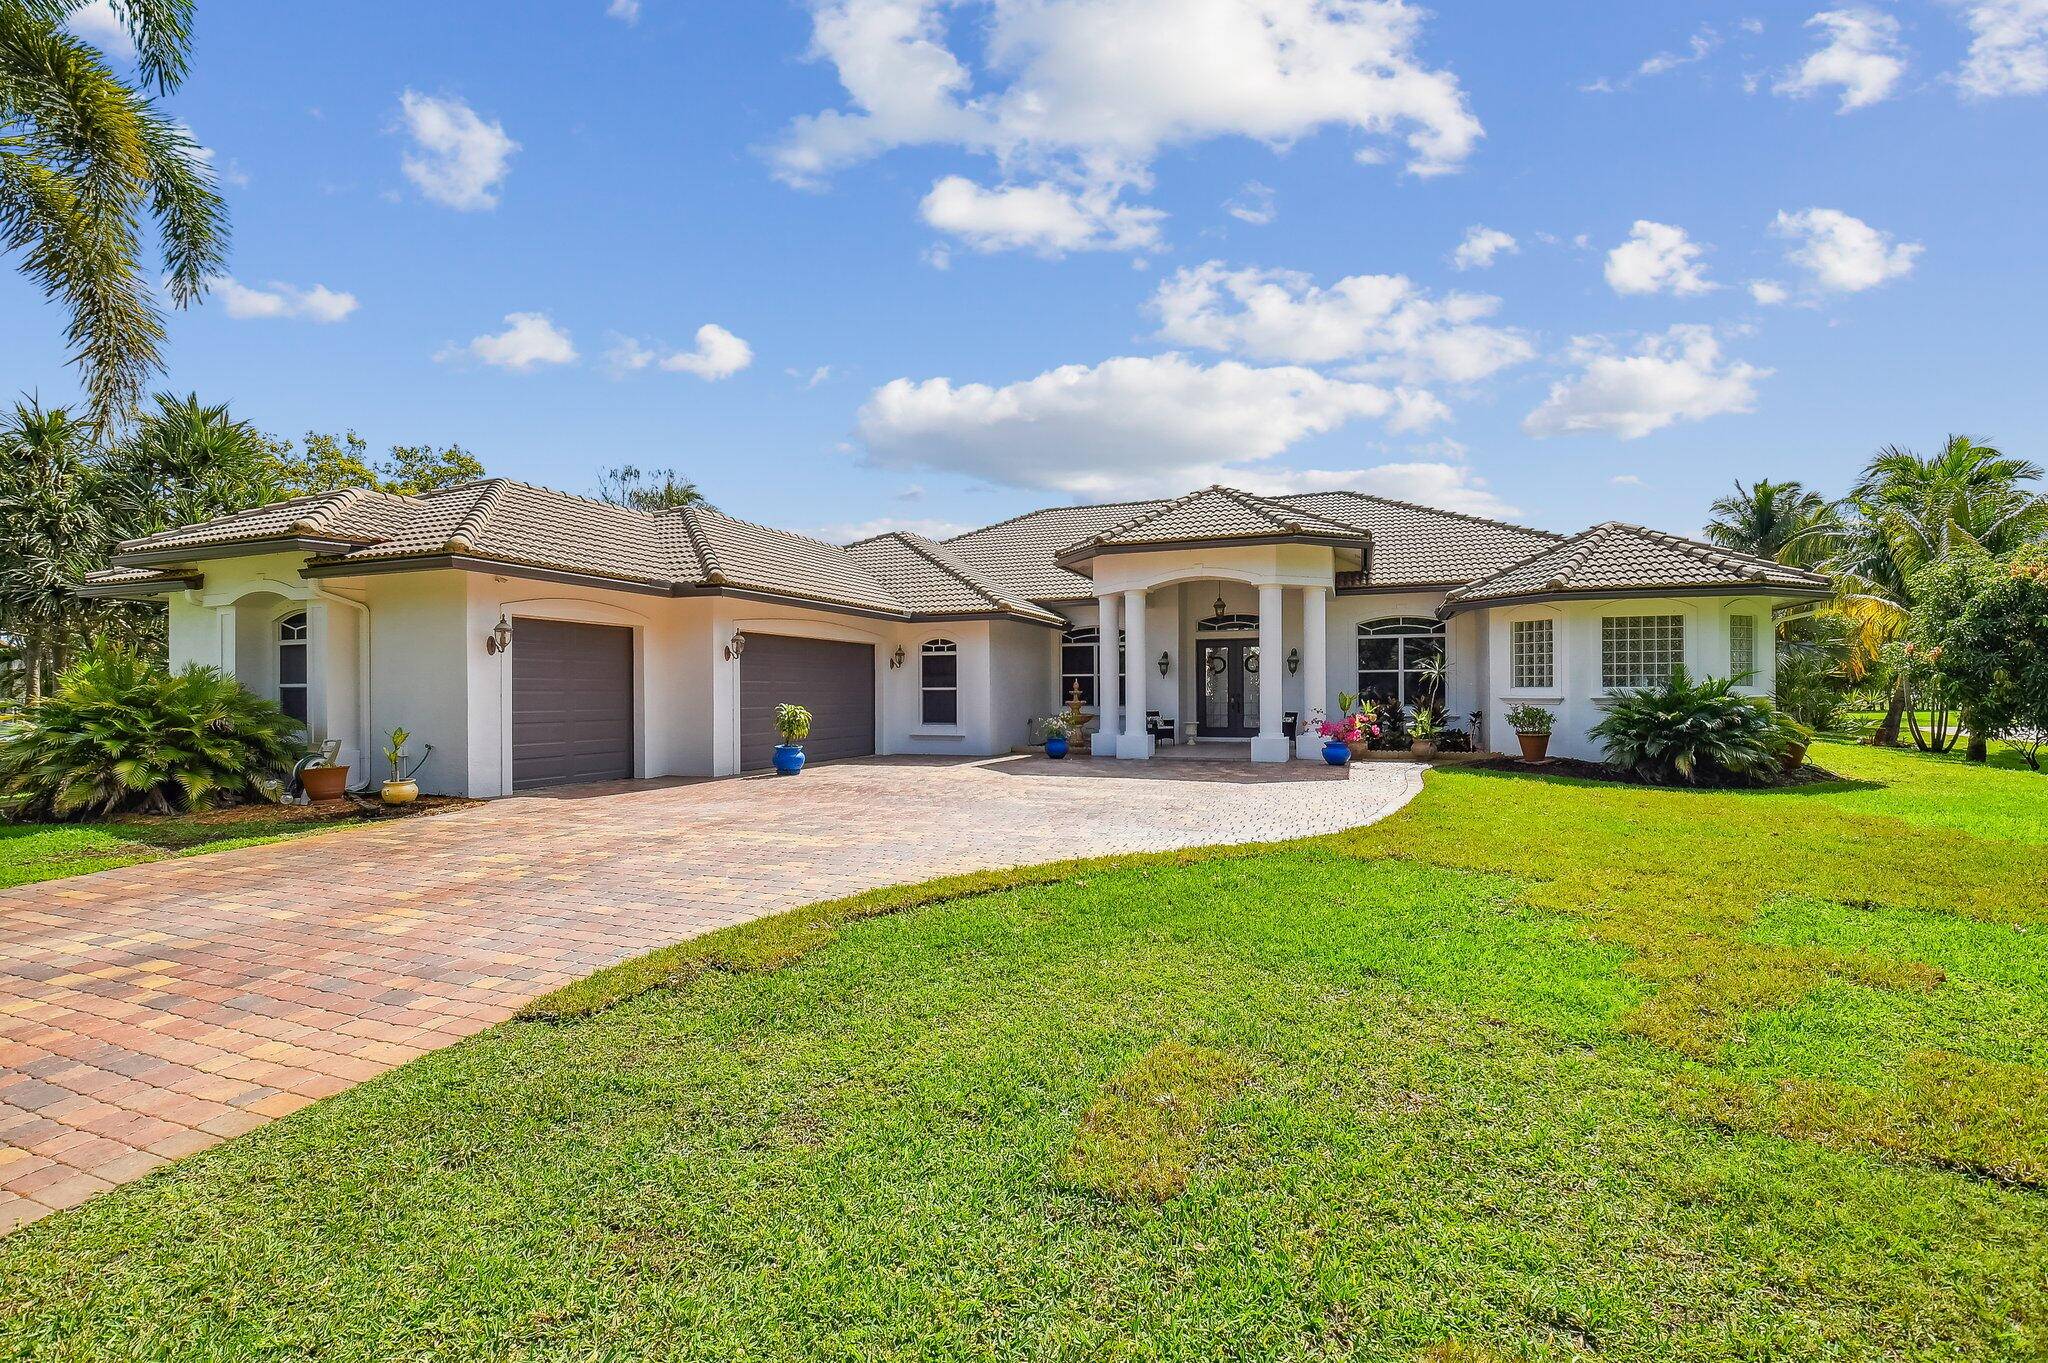 Gorgeous Estate property on just over an acre, located in the prestigious gated community of Delray Lake Estates.